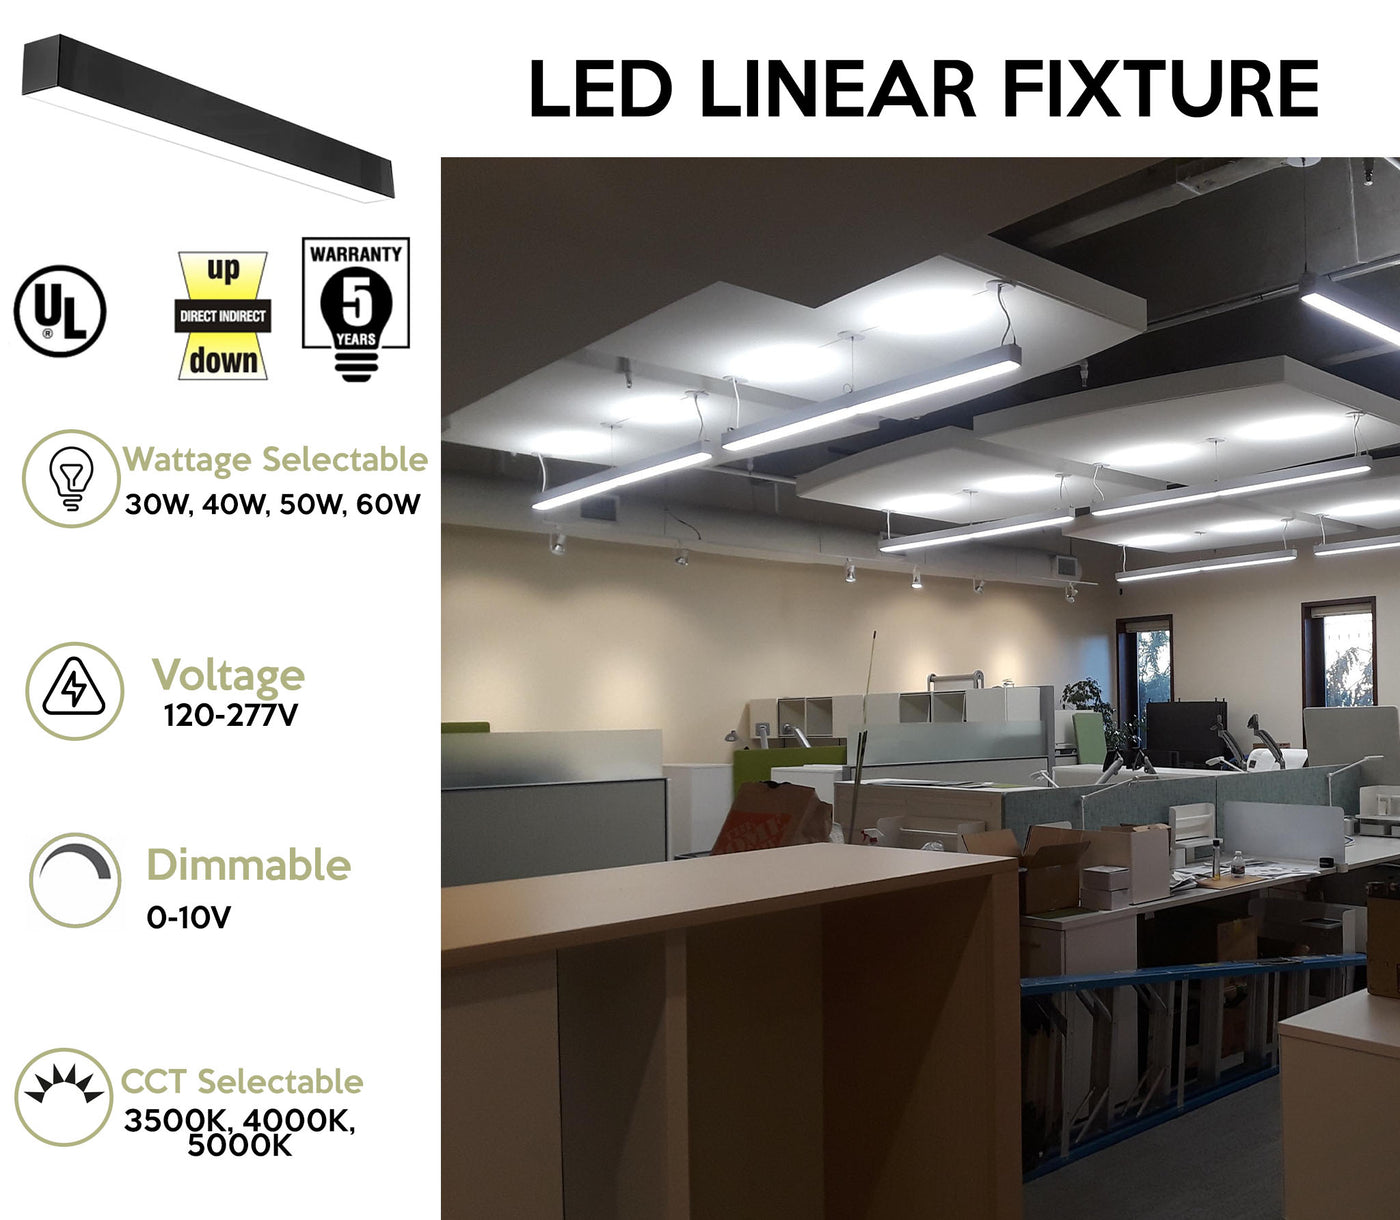 4 FT LED Direct/Indirect Suspended Linear Fixture G2, 6900 Lumen Max, Wattage and CCT Selectable, 120-277V, Black Finish